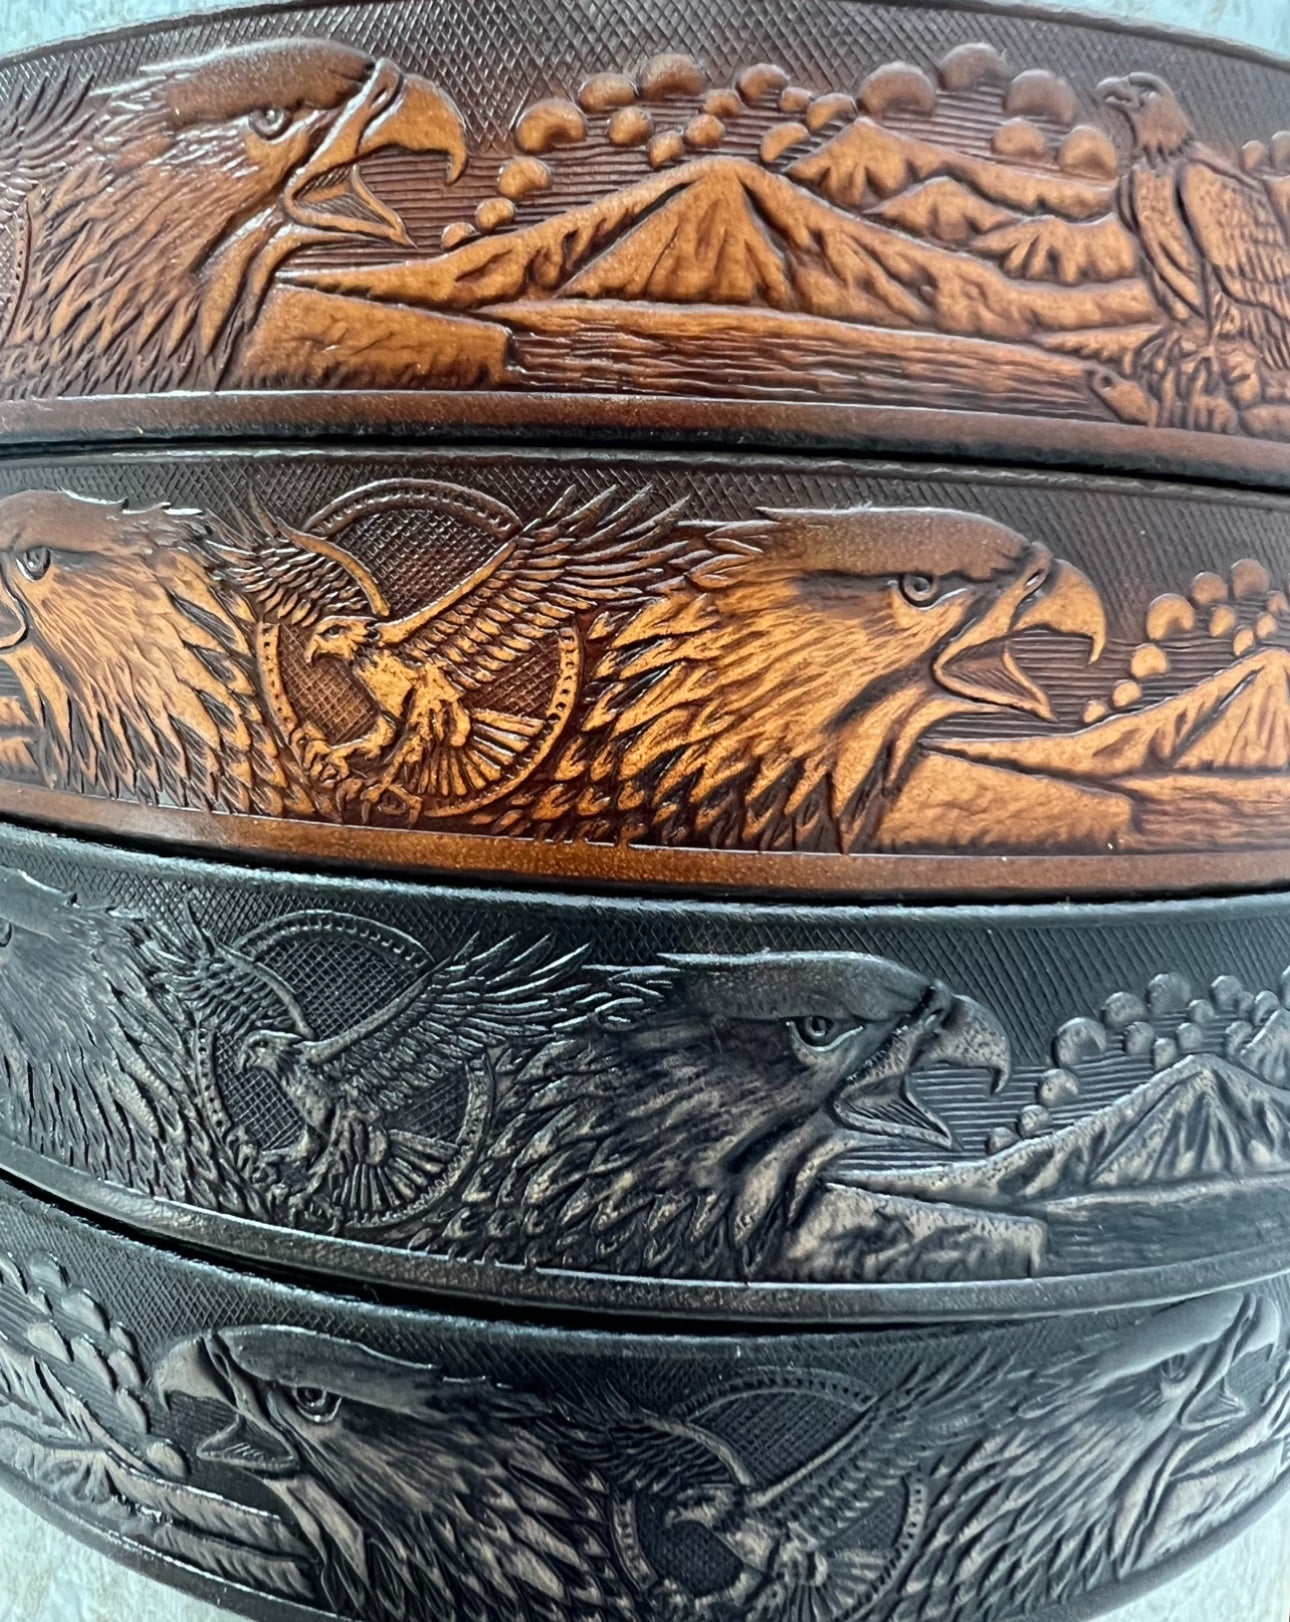 High Springs Leather  Eagle and Wildlife Leather Belts